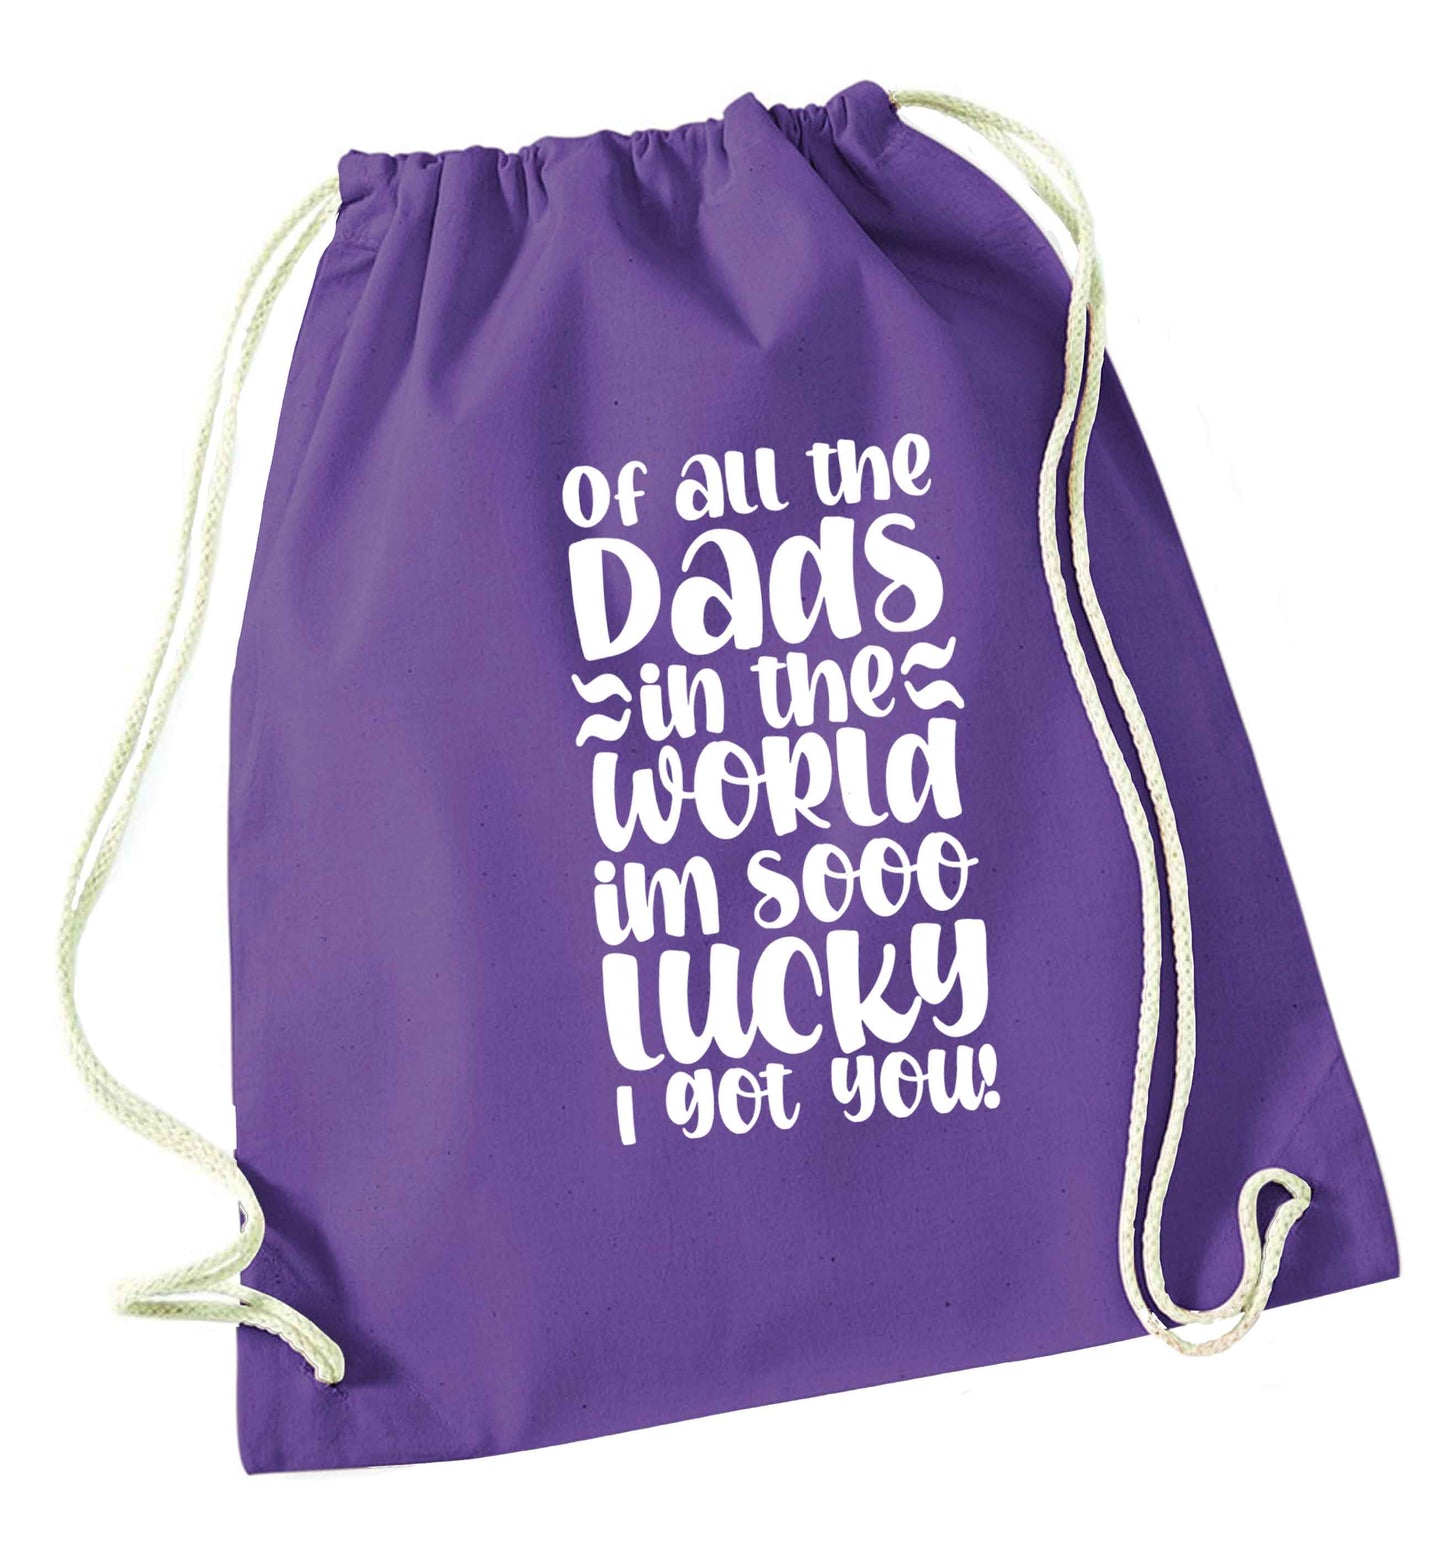 Of all the Dads in the world I'm so lucky I got you purple drawstring bag